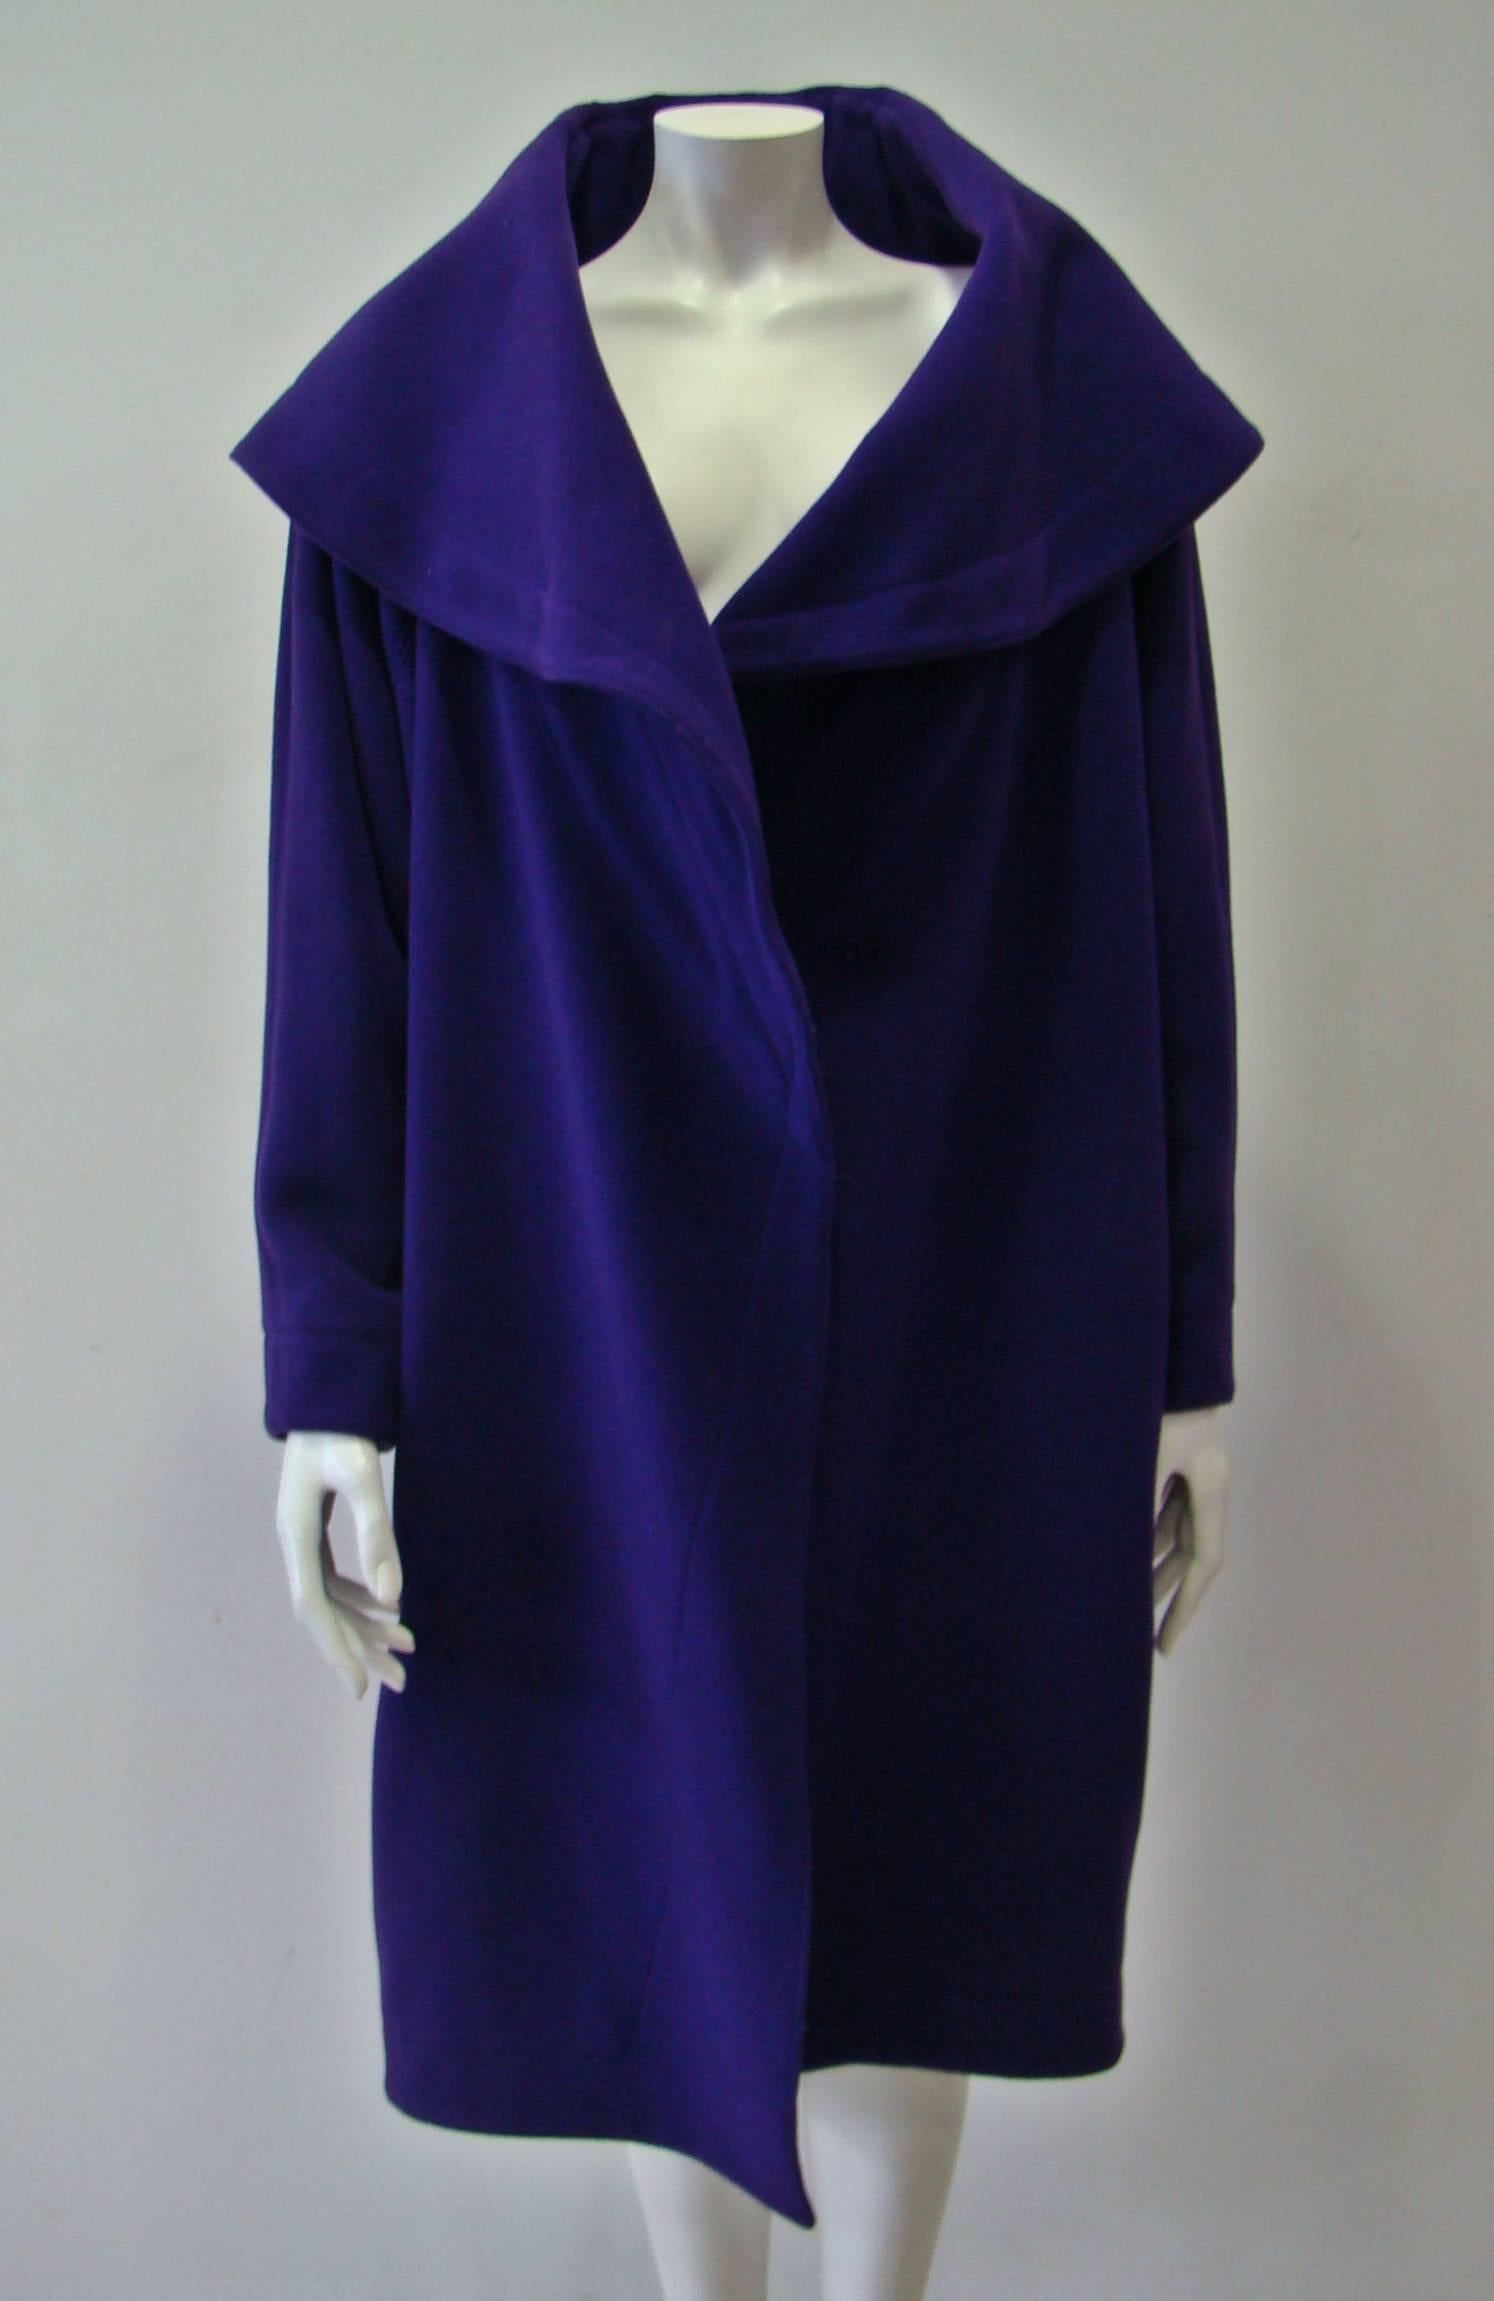 Add This Coat Into Your Everyday Wardrobe This Season As A Stylish Cover Up For Colder Days. A Spacious Purple Coat From Claude Montana With Wide Collar, Simple Long Sleeves And Roomy Patch Pockets. A Loose Style, Even If It Is Small It Can Easily